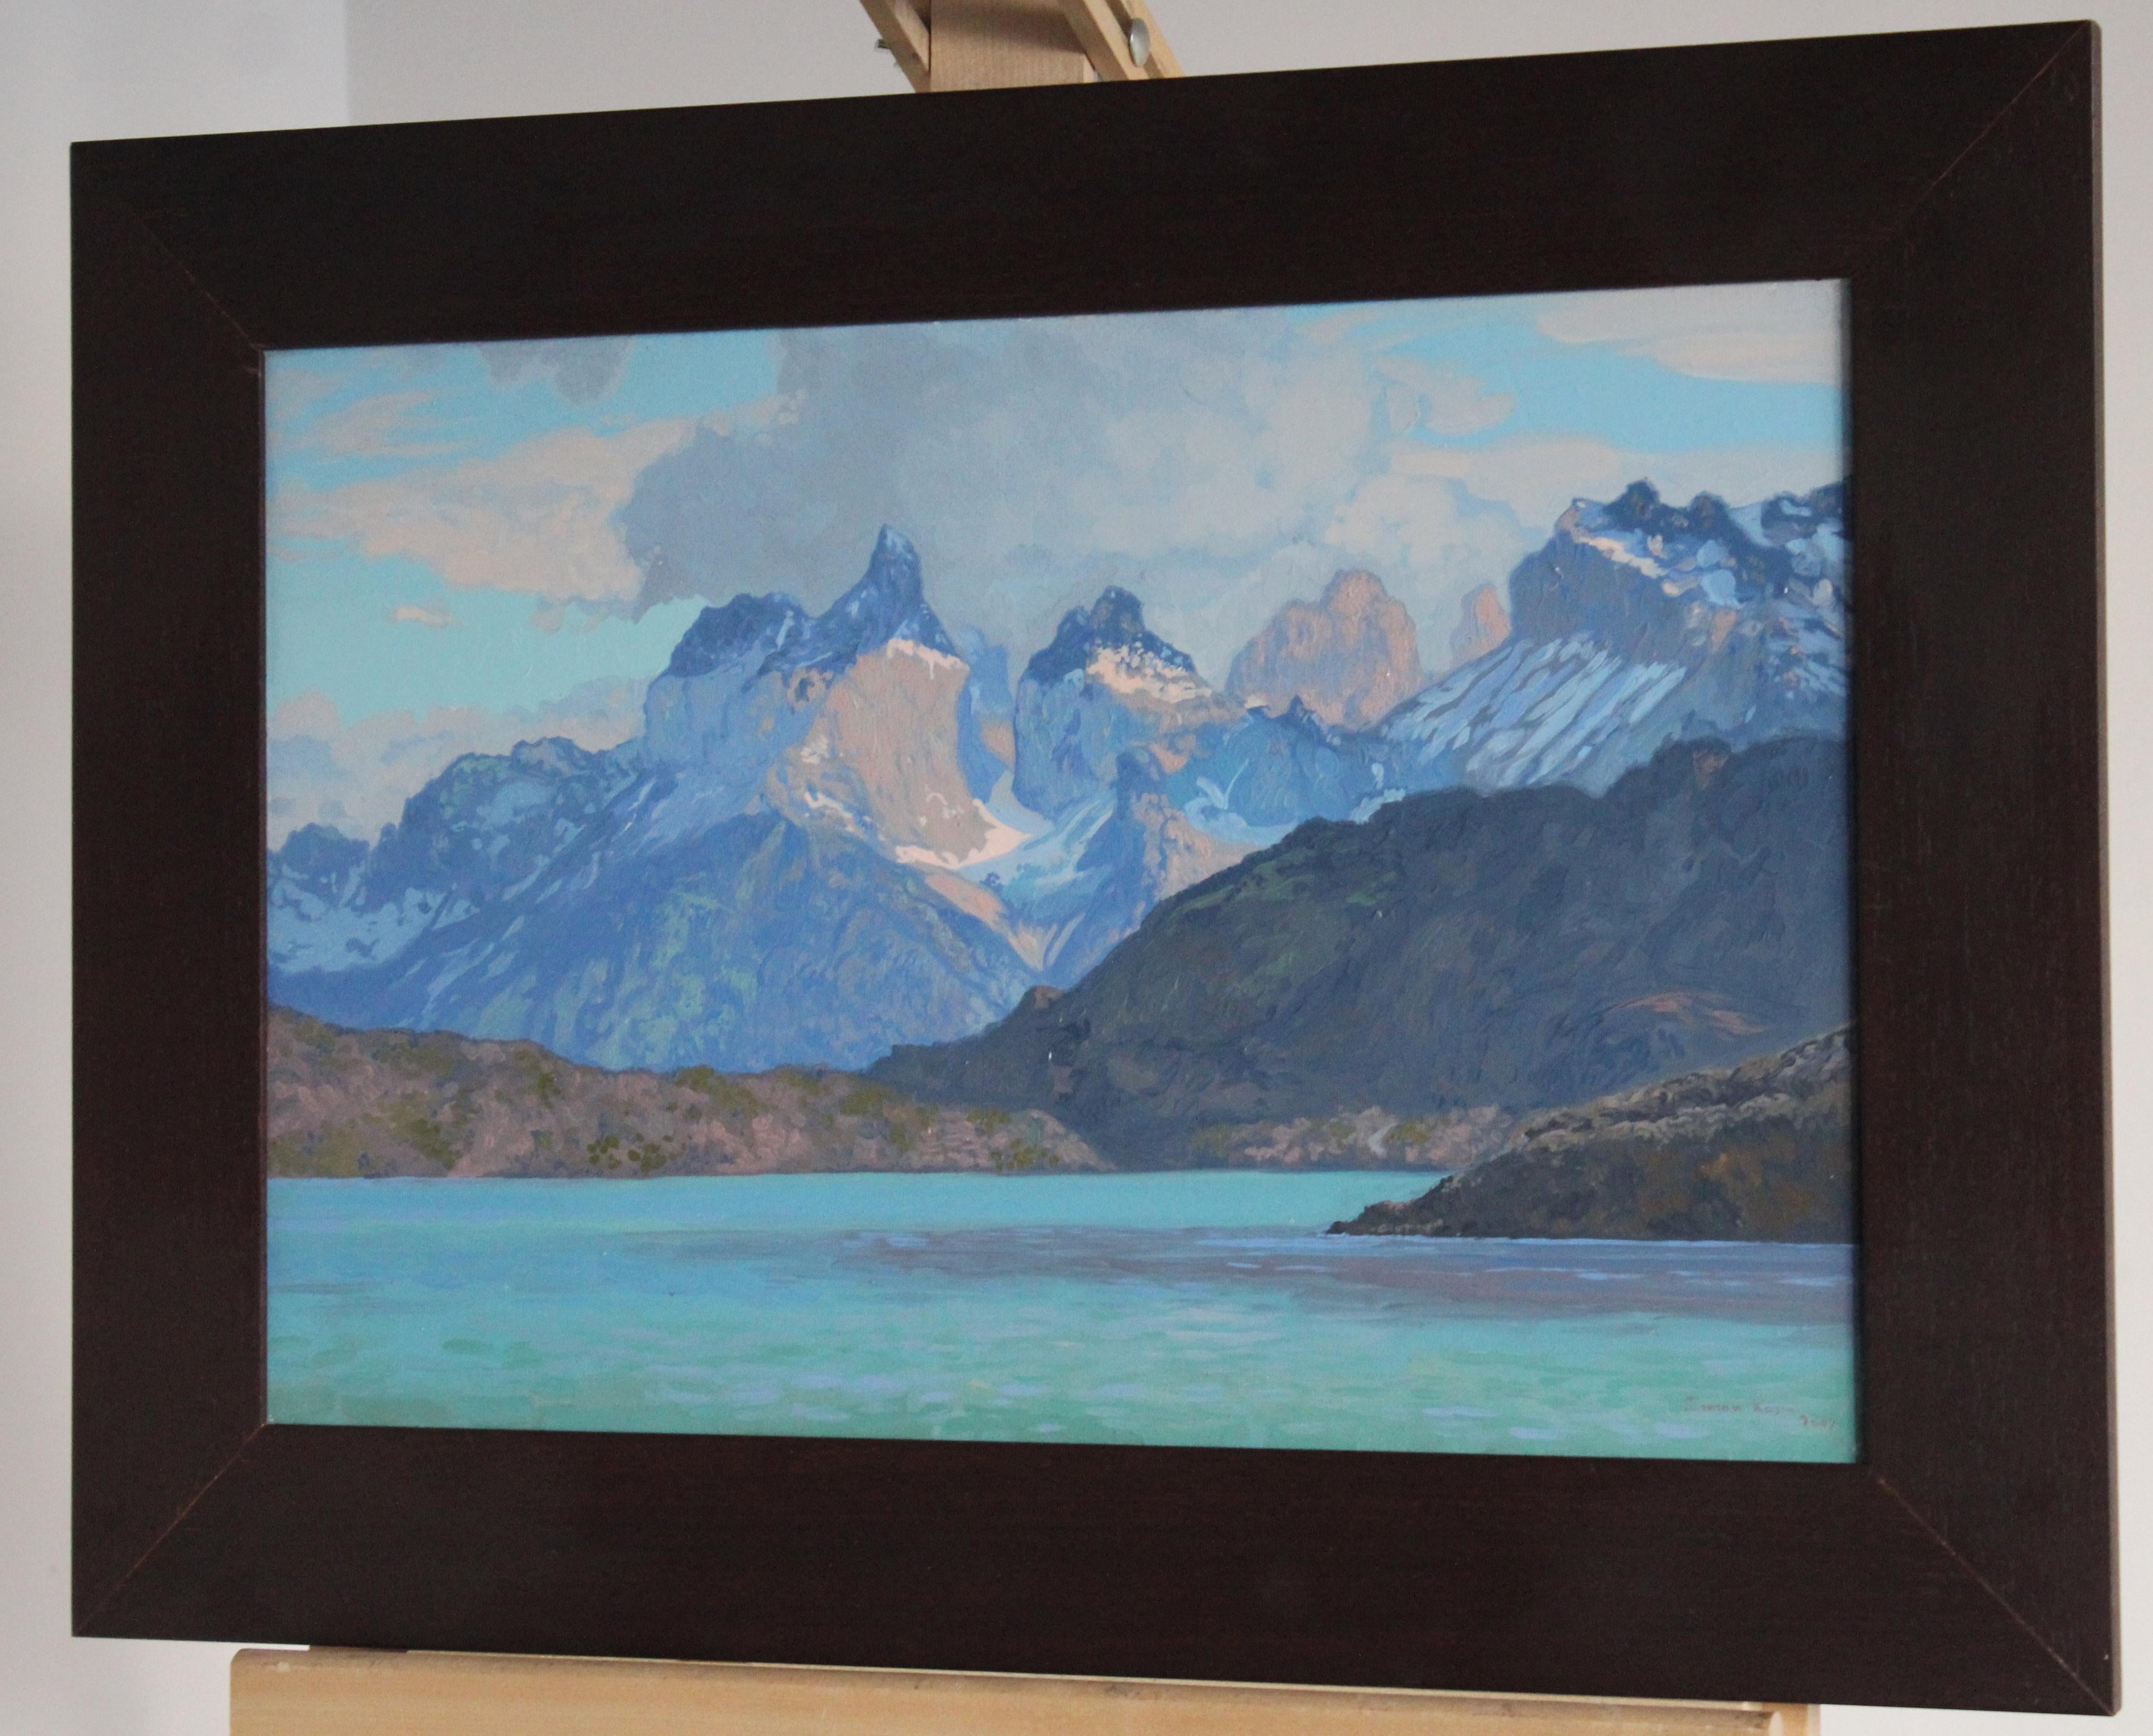 Mountains. Patagonia. Chile. Torres del Paine by Simon Kozhin For Sale 5